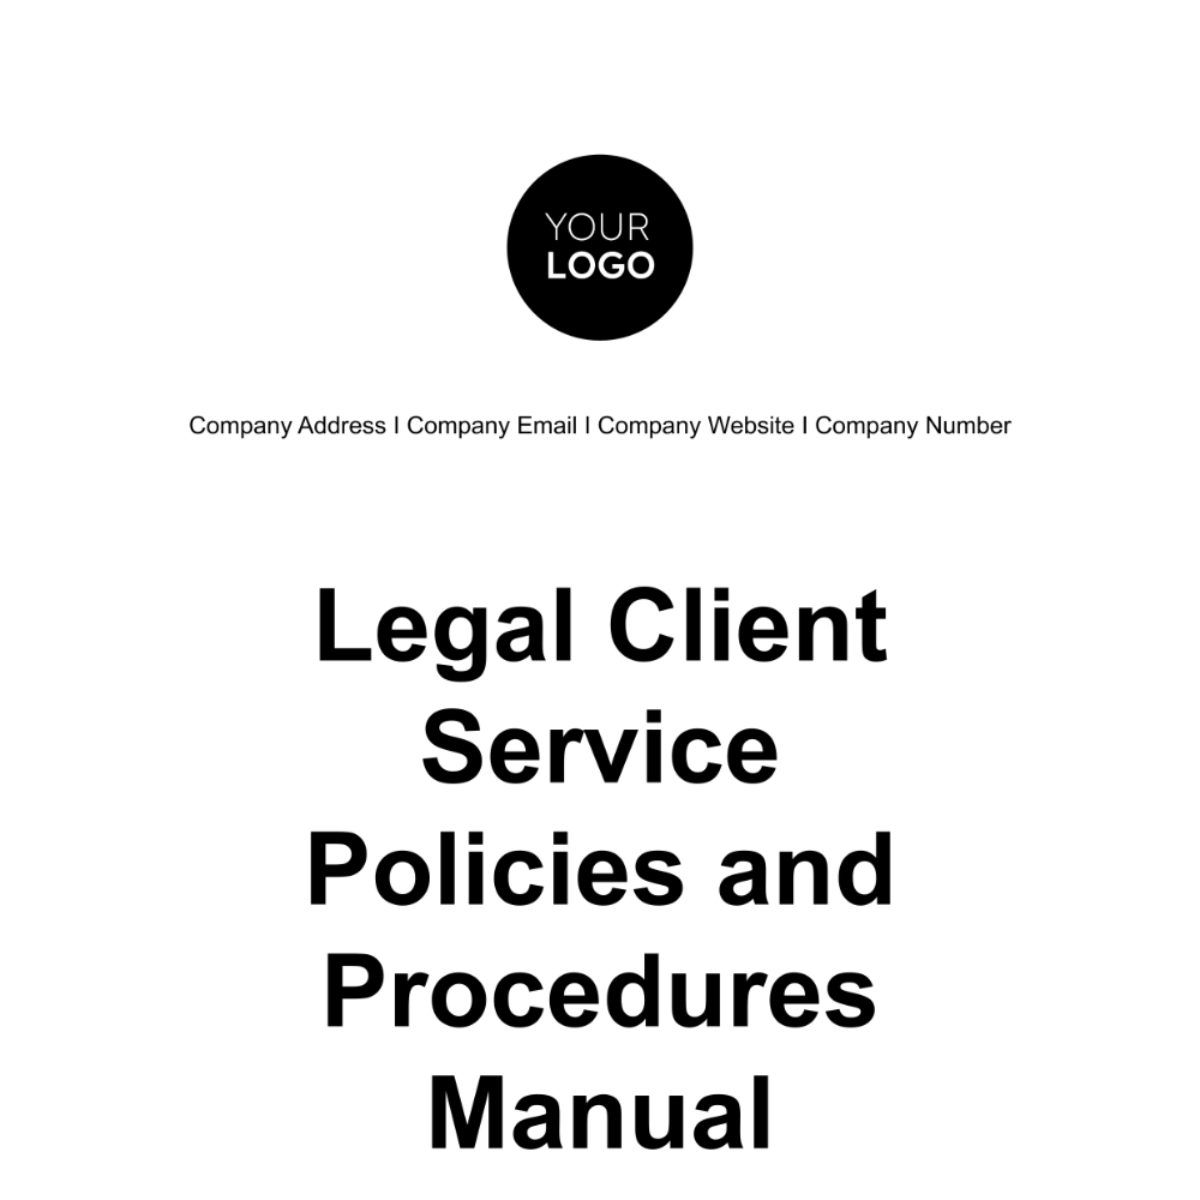 Free Legal Client Service Policies and Procedures Manual Template